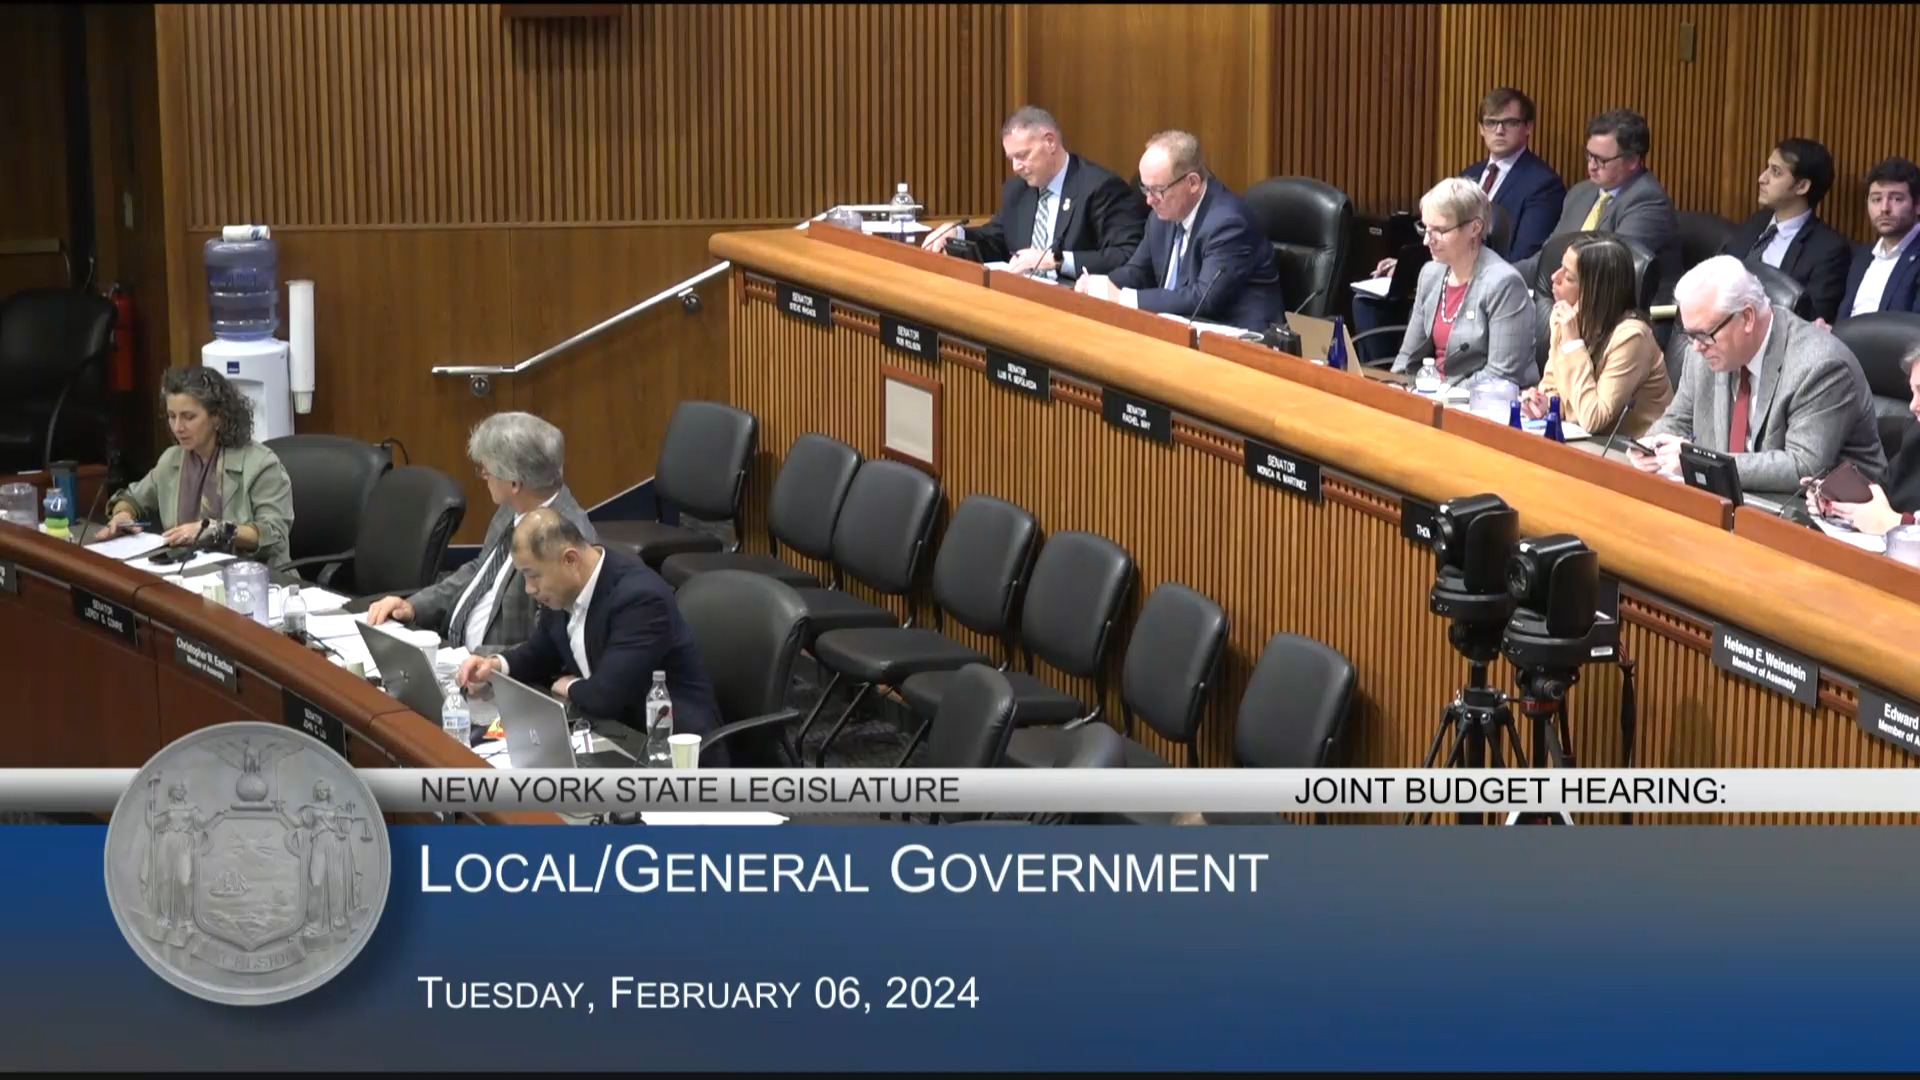 Advocates Testify During Budget Hearing on Local/General Government